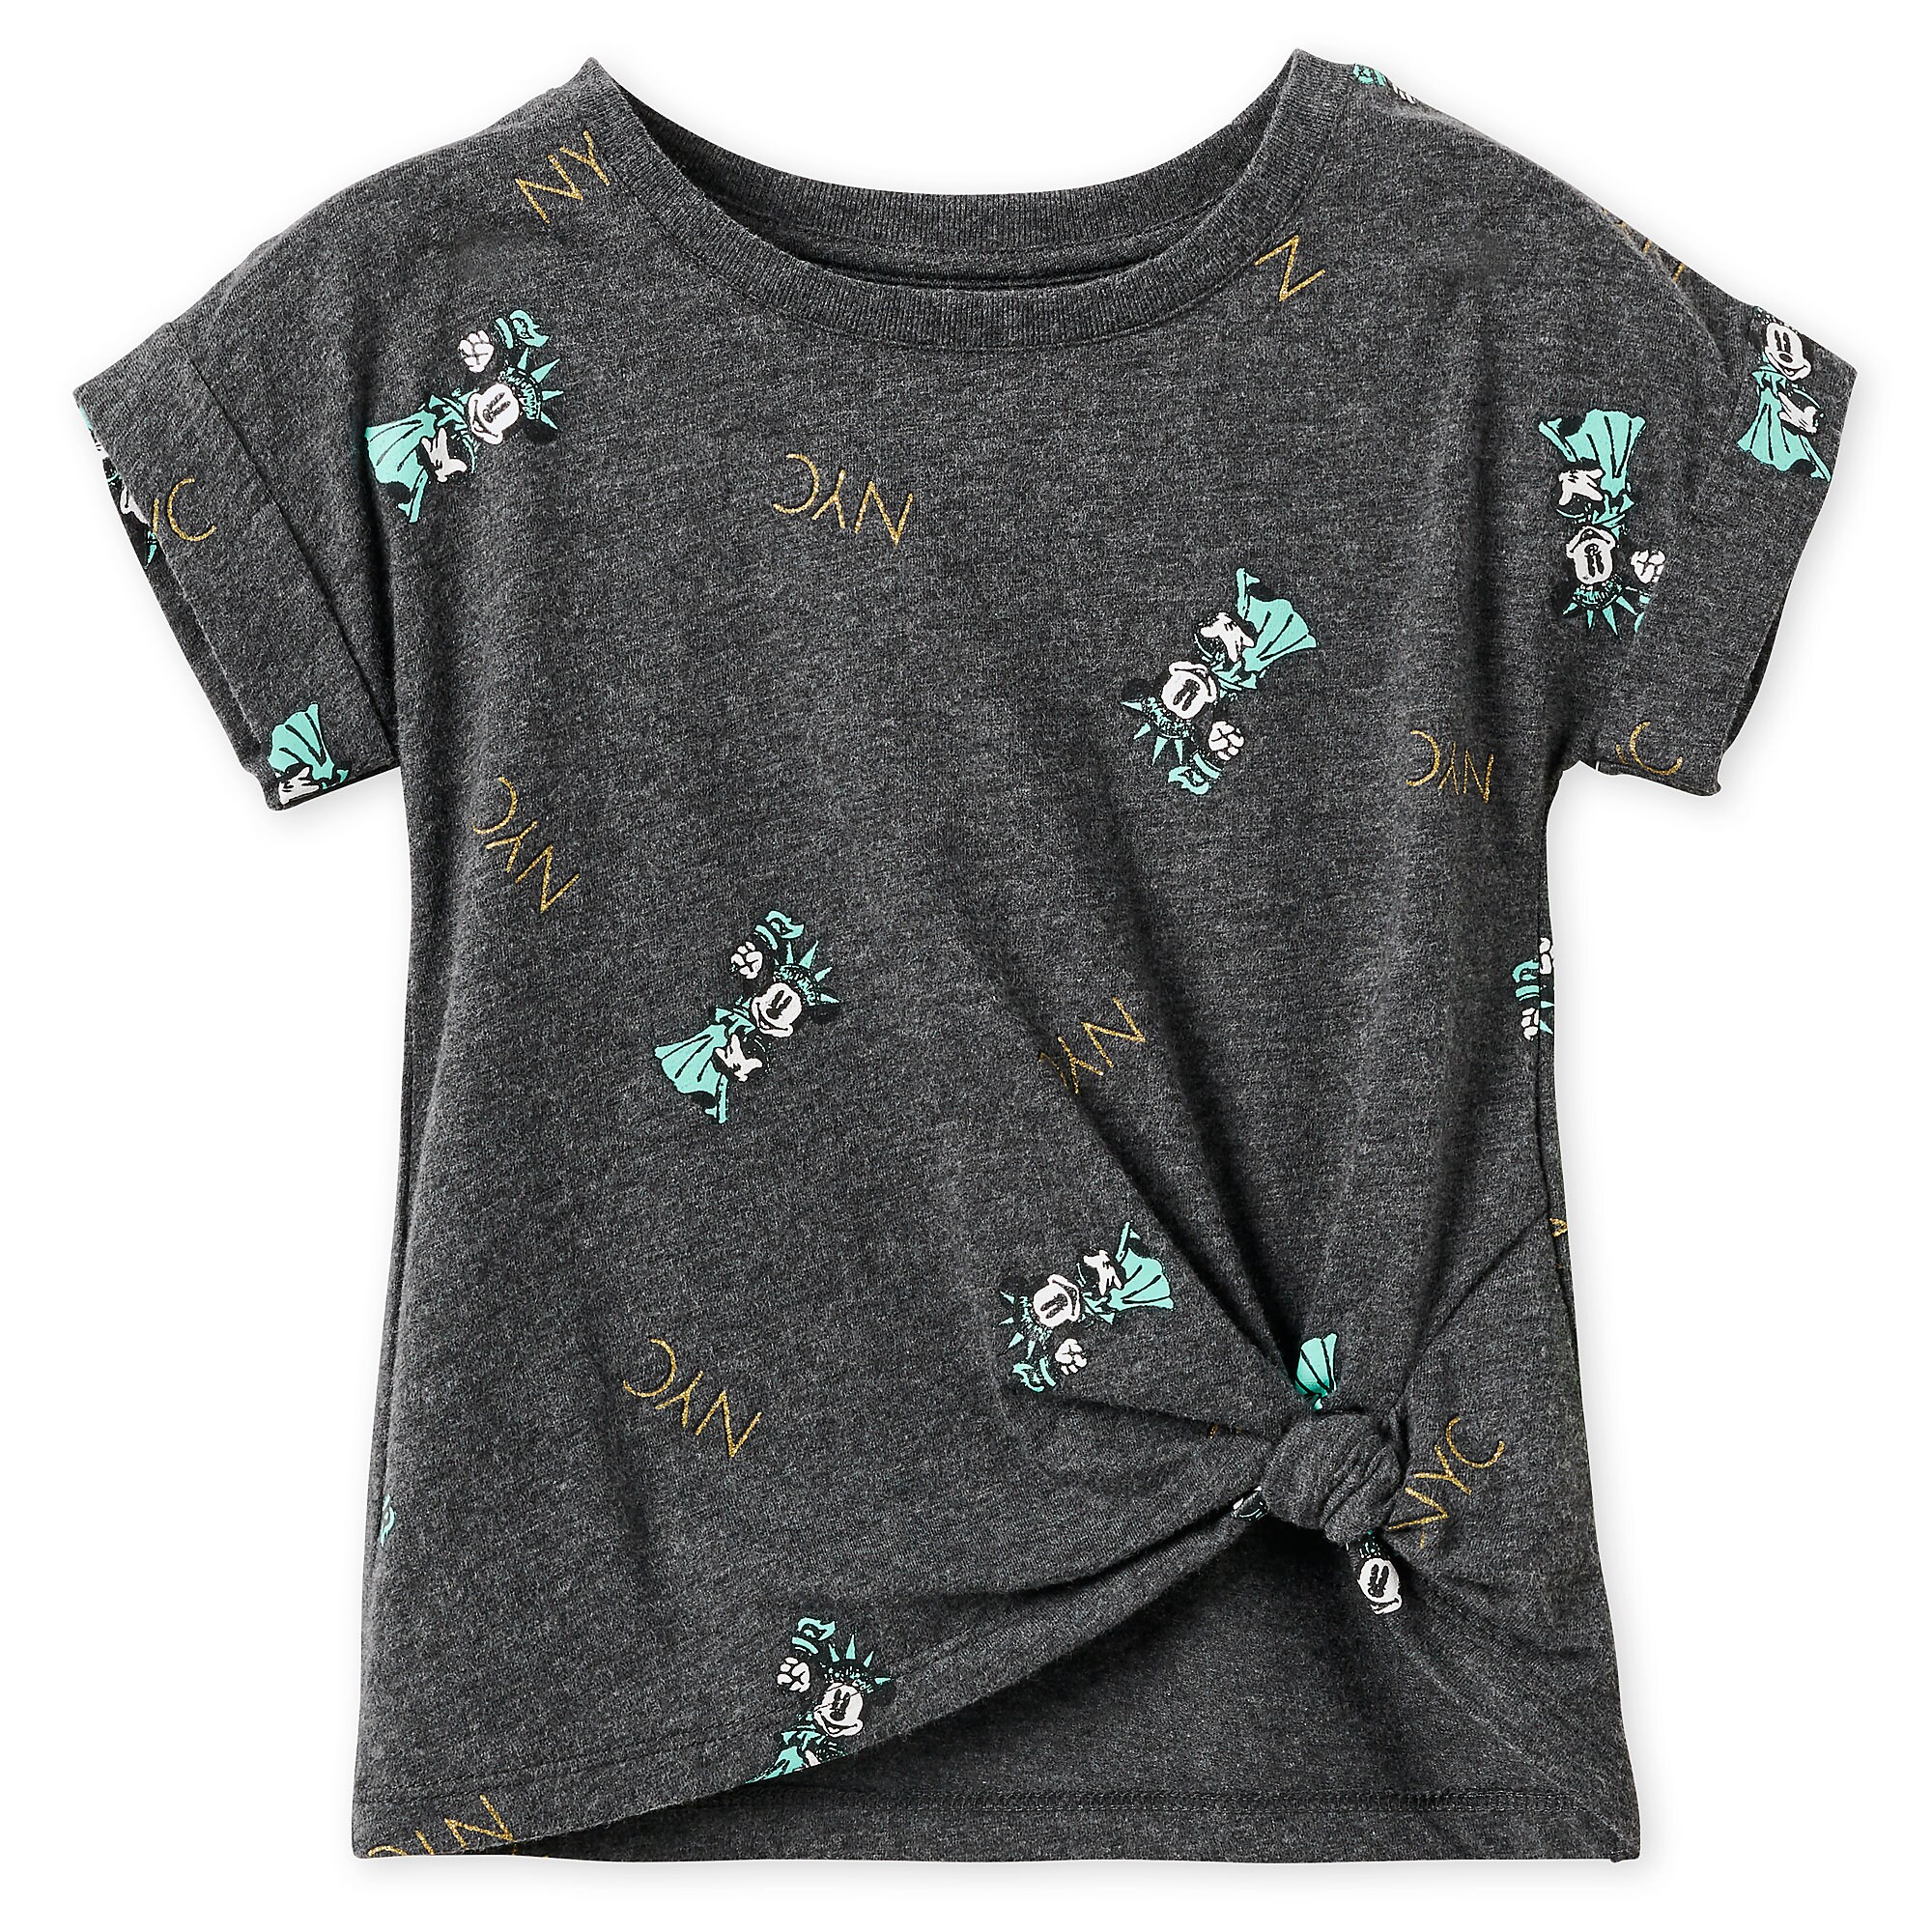 Minnie Mouse NYC T-Shirt for Girls - New York City